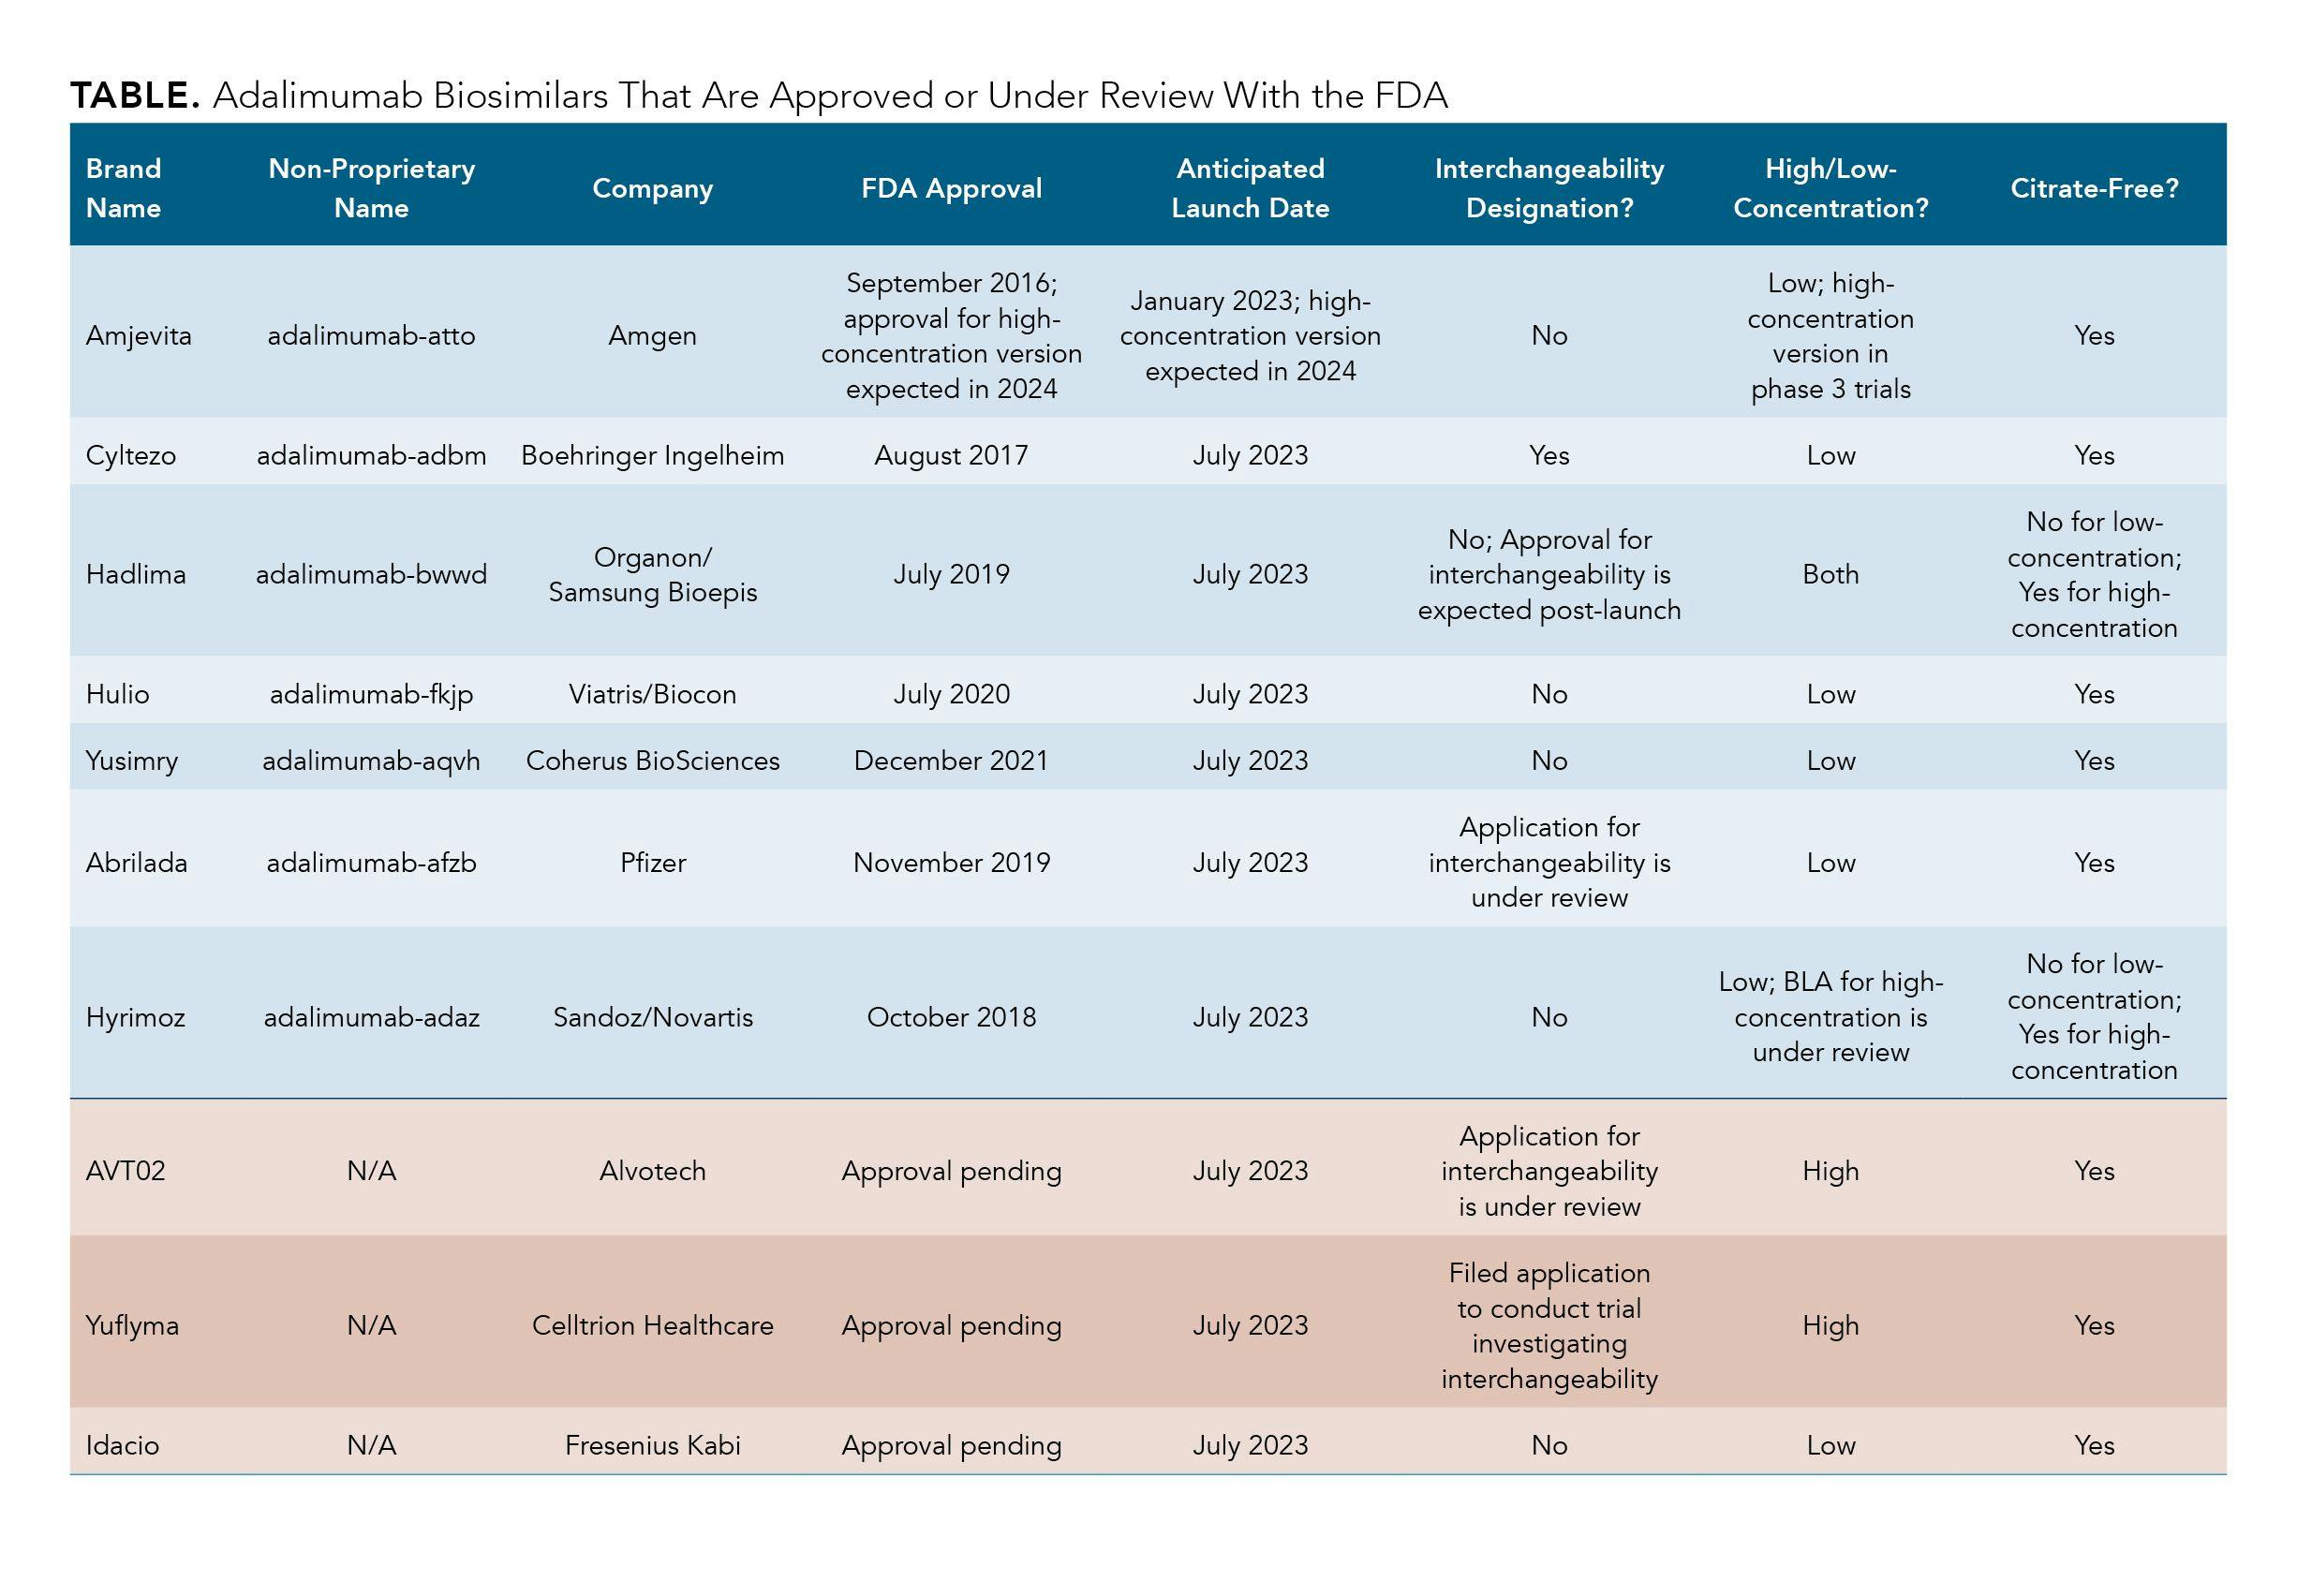 a table listing all of the adalimumab biosimilars approved or under review with the FDA. The table features information on the brand names, non-proprietary names, approval dates, anticipated launch dates, whether a high-concentration or citrate-free option will be available, and whether they have an interchangeability designation